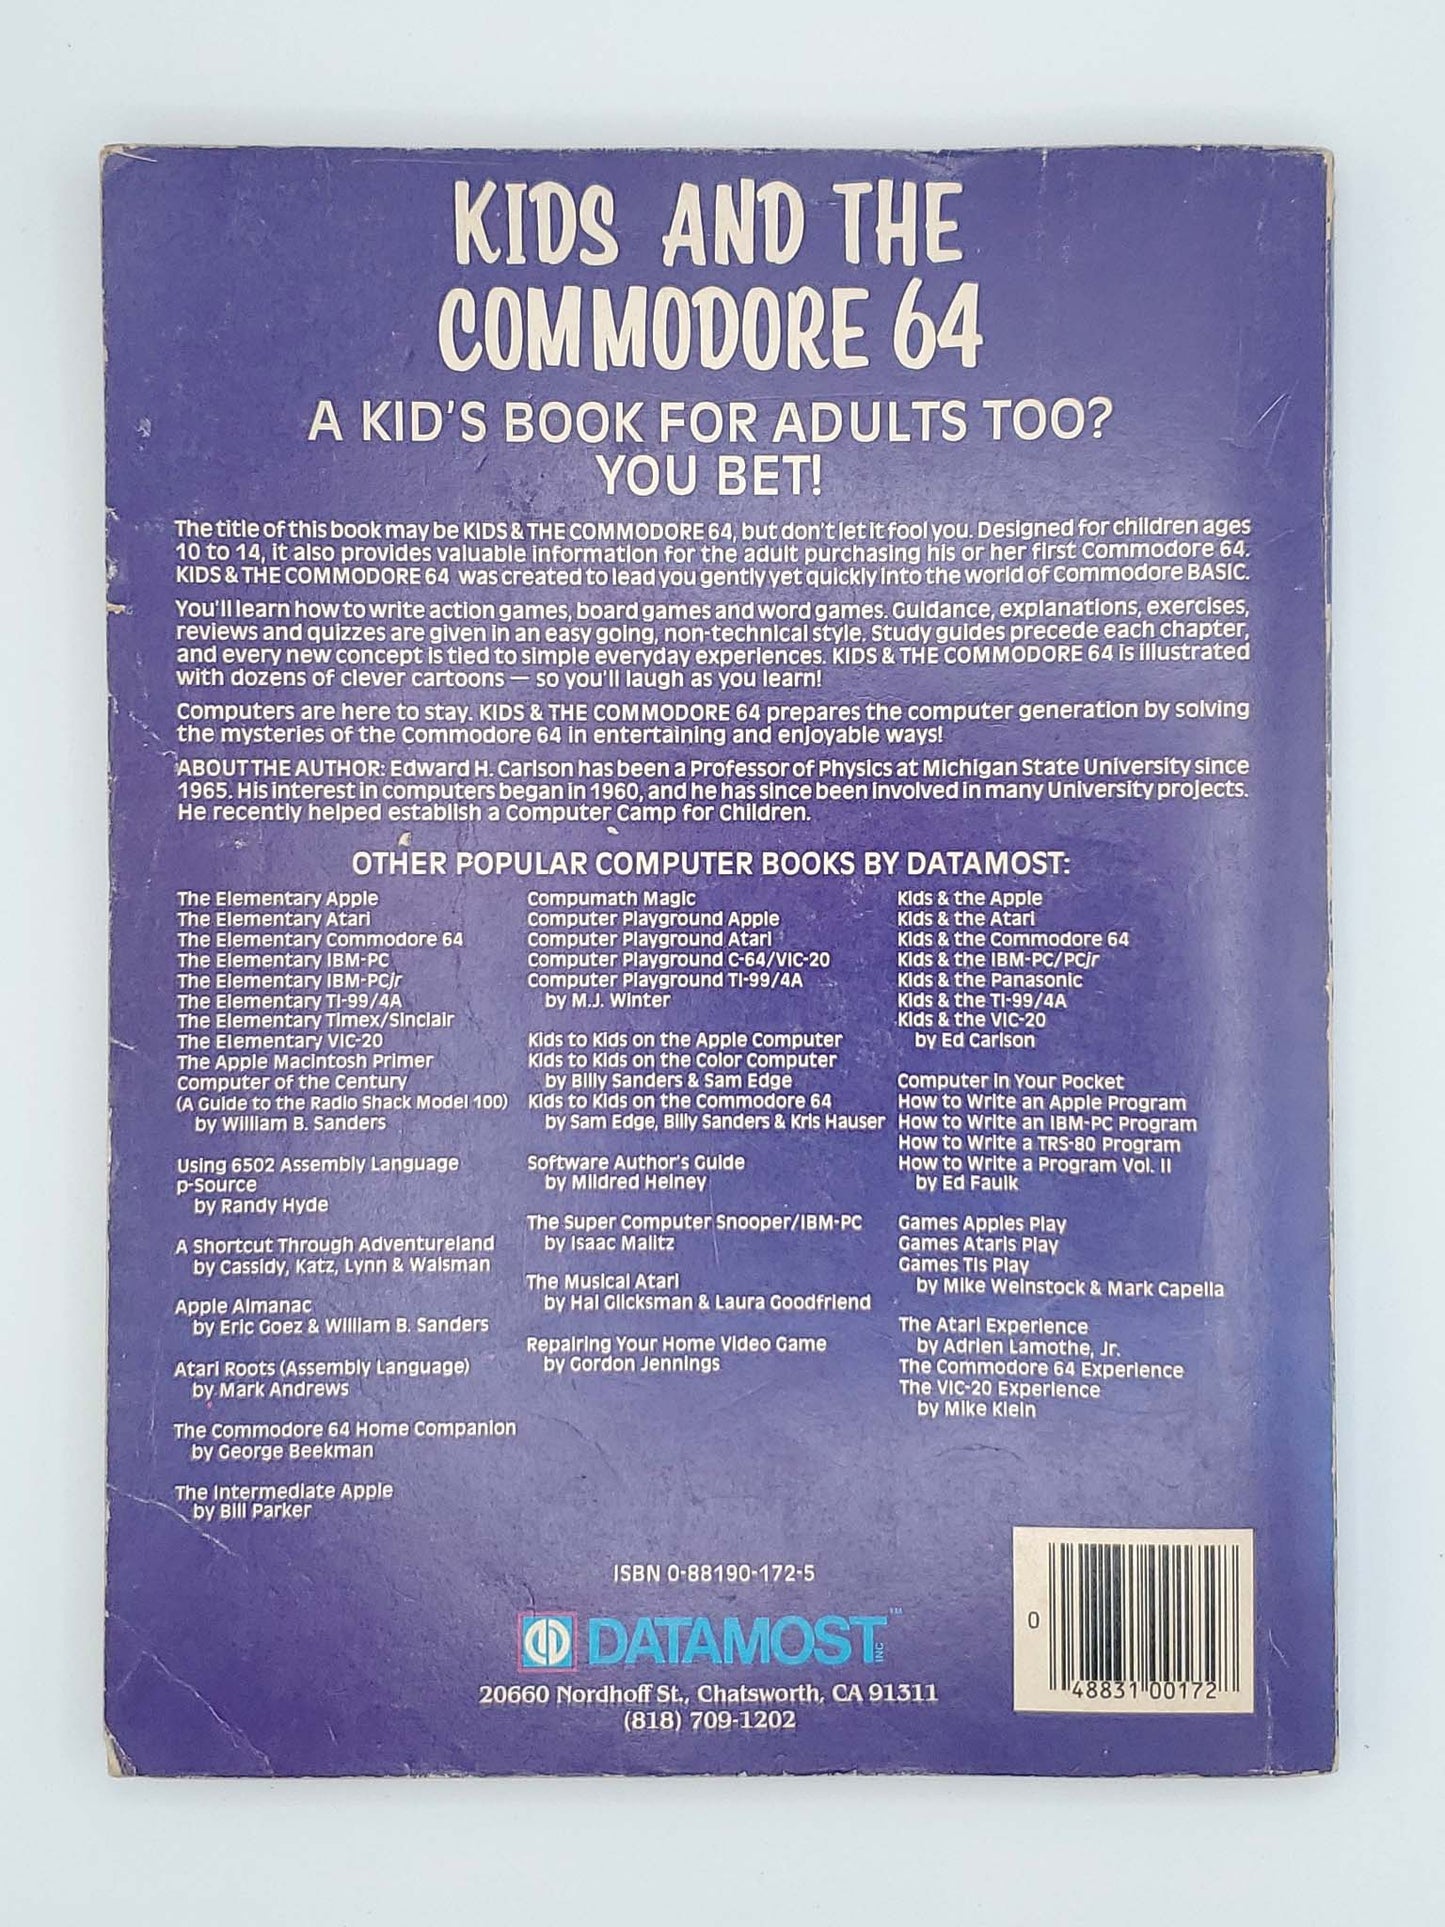 Kids & the Commodore 64 - 3rd Printing